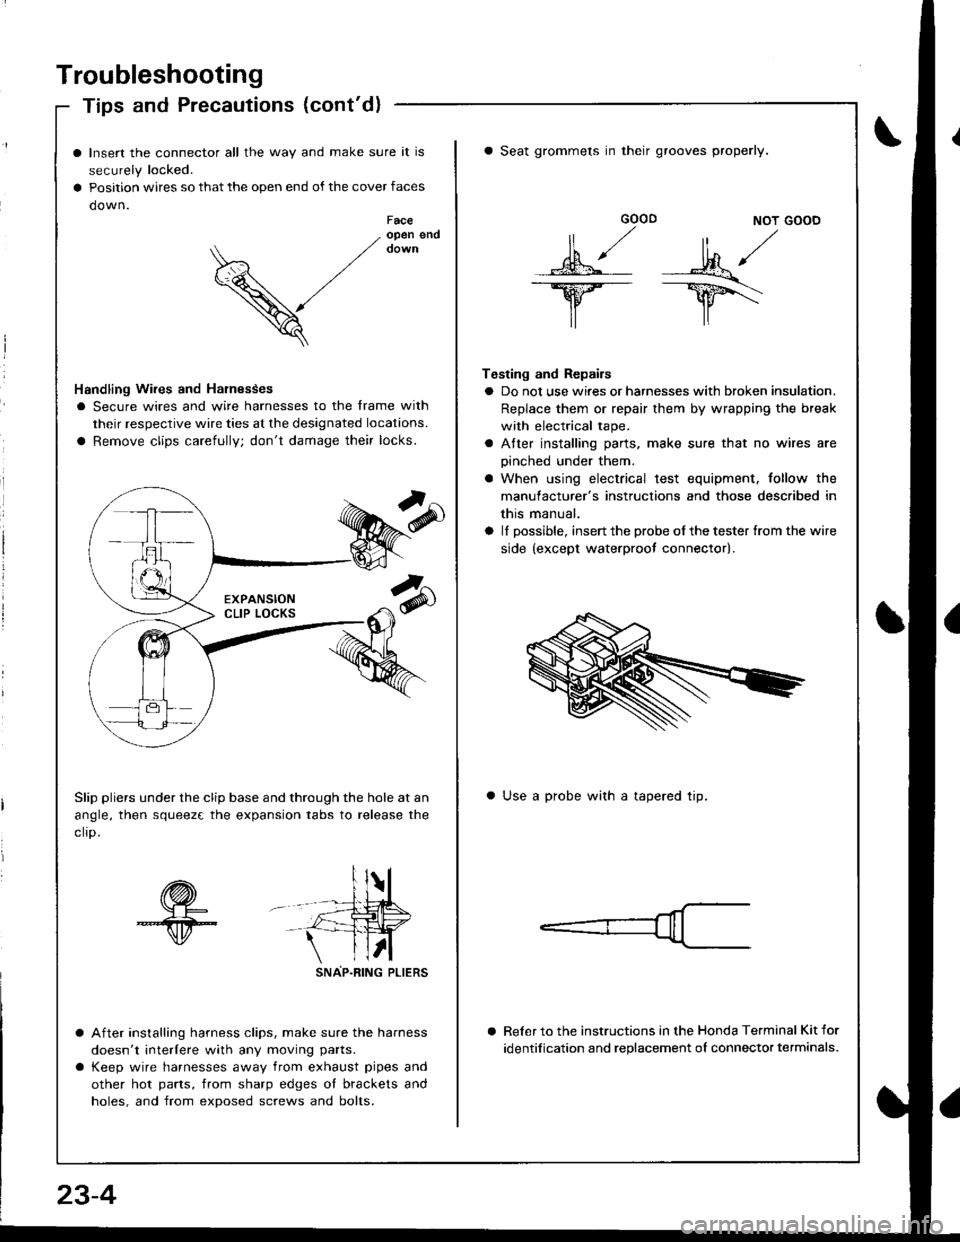 HONDA INTEGRA 1998 4.G Workshop Manual Troubleshooting
Tips and Precautions (contd)
Insert the connector all the way and make sure it is
securely locked.
Position wires so that the open end of the cover faces
down.Faceopen end
V
Handling 